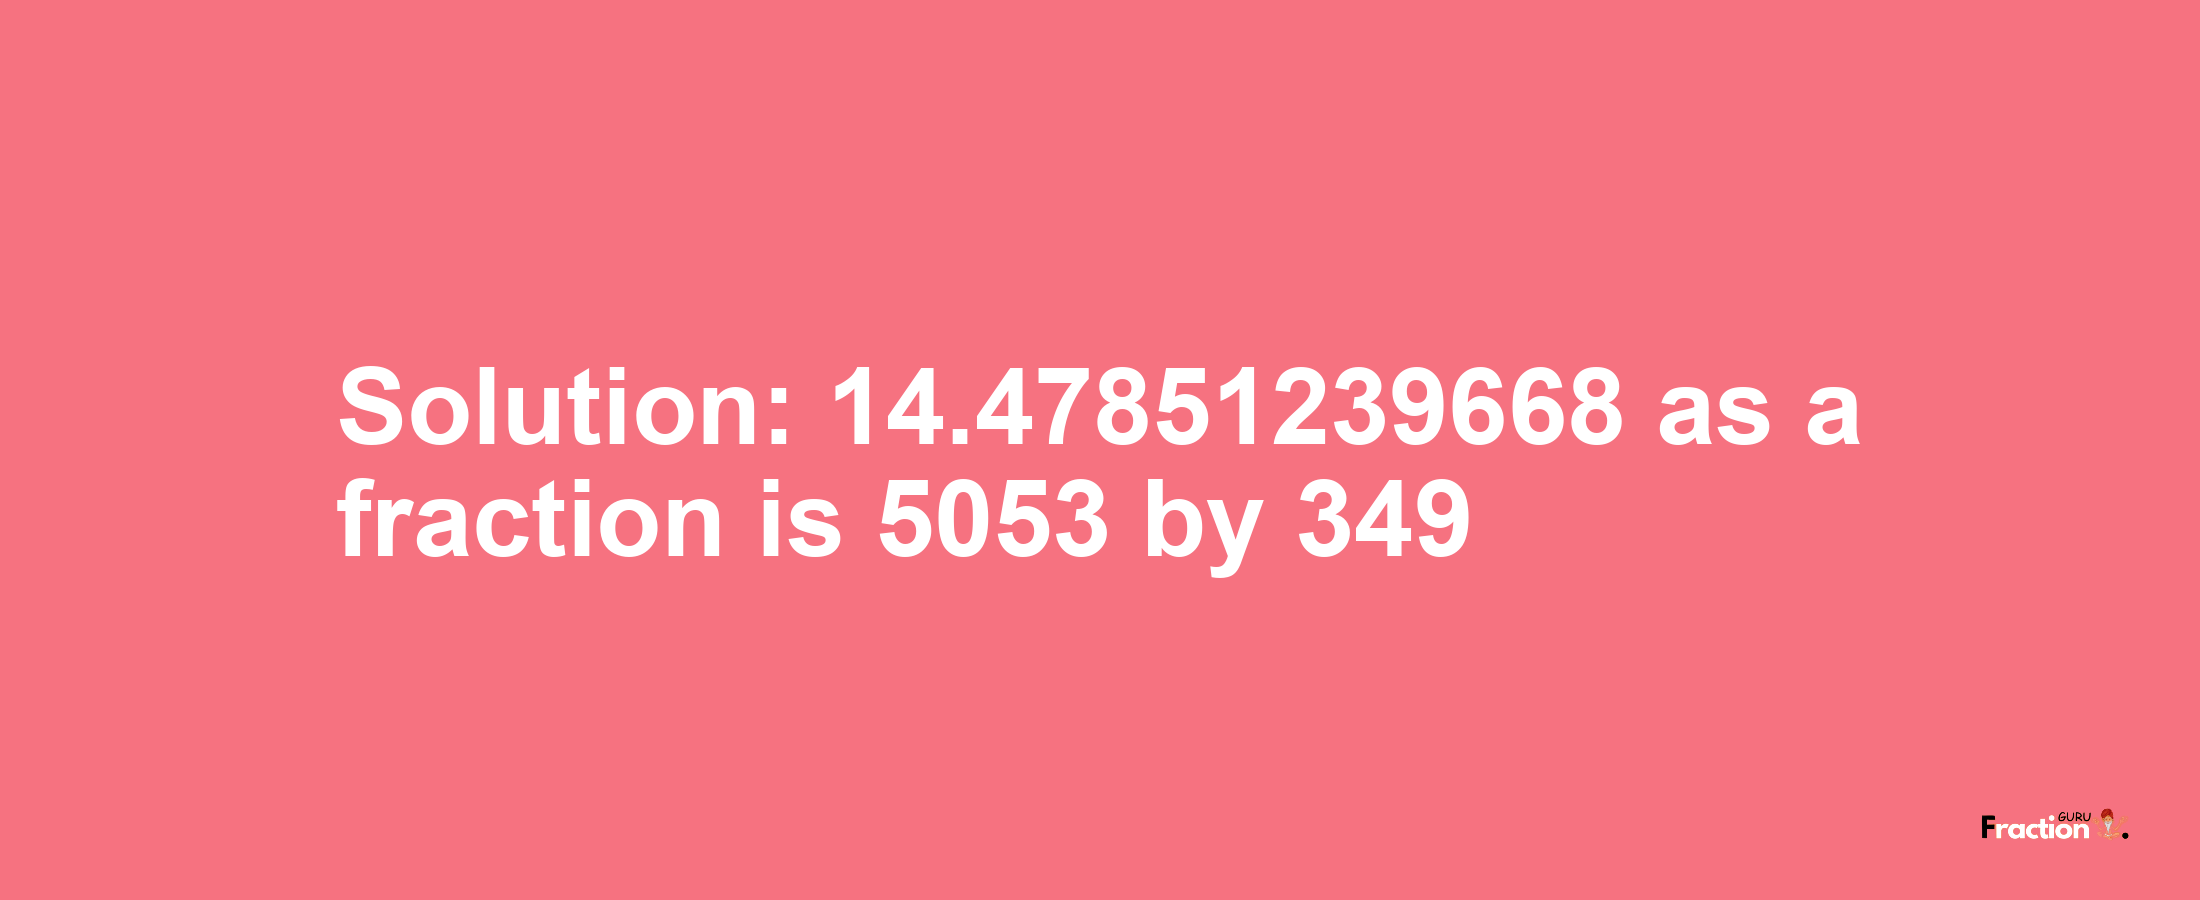 Solution:14.47851239668 as a fraction is 5053/349